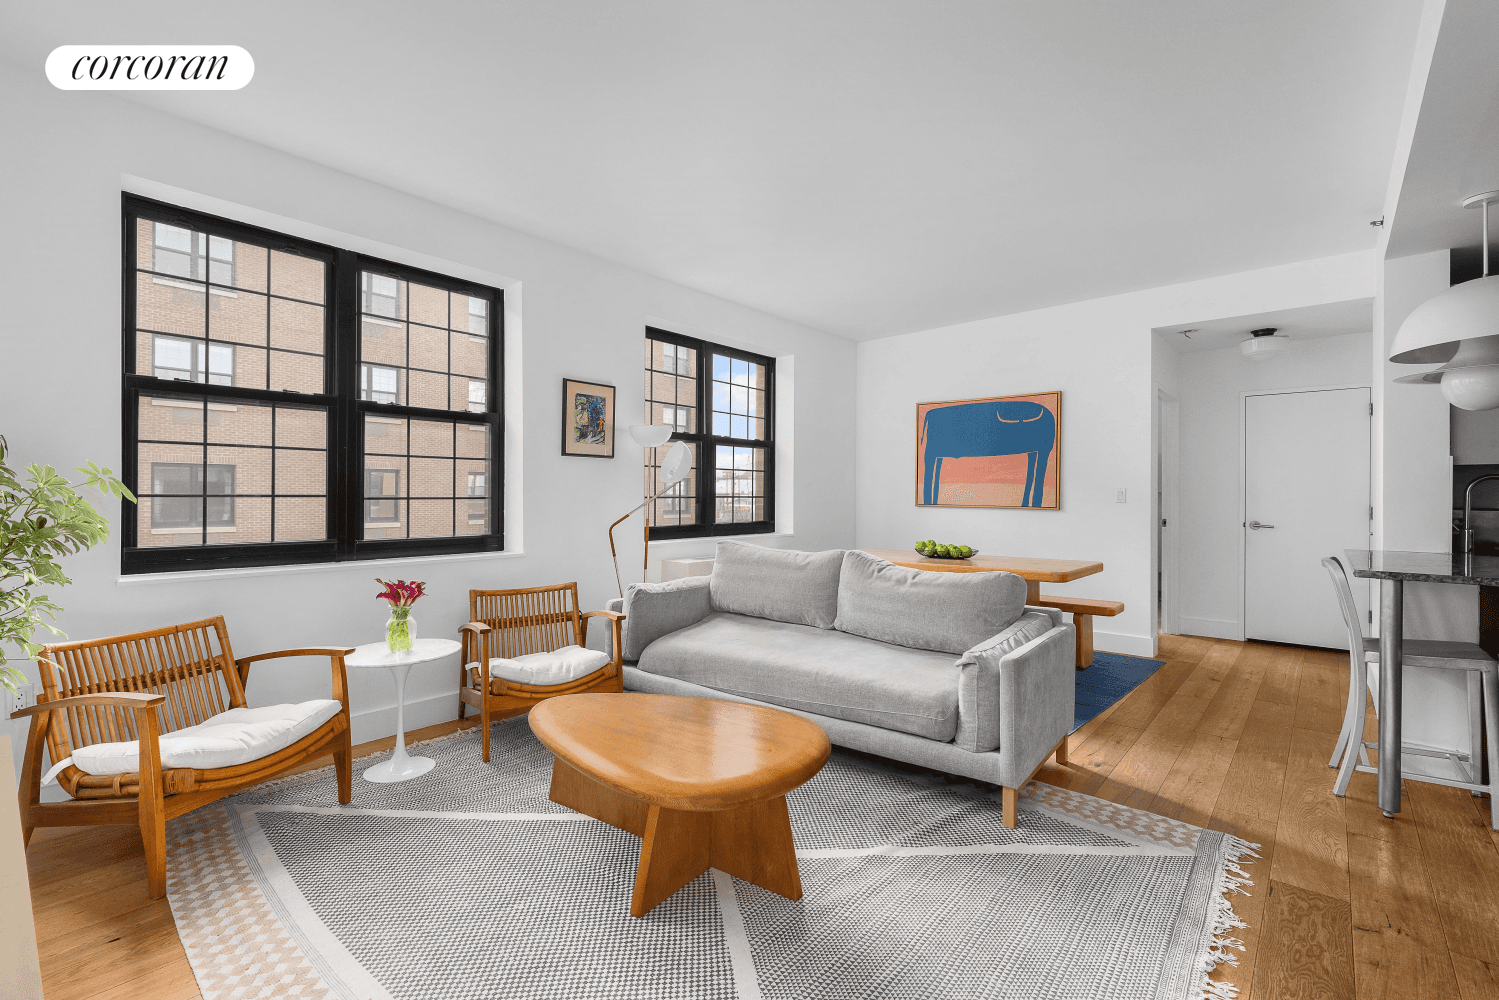 Welcome to Unit B401 at Columbia Commons Condominium in Cobble Hill.